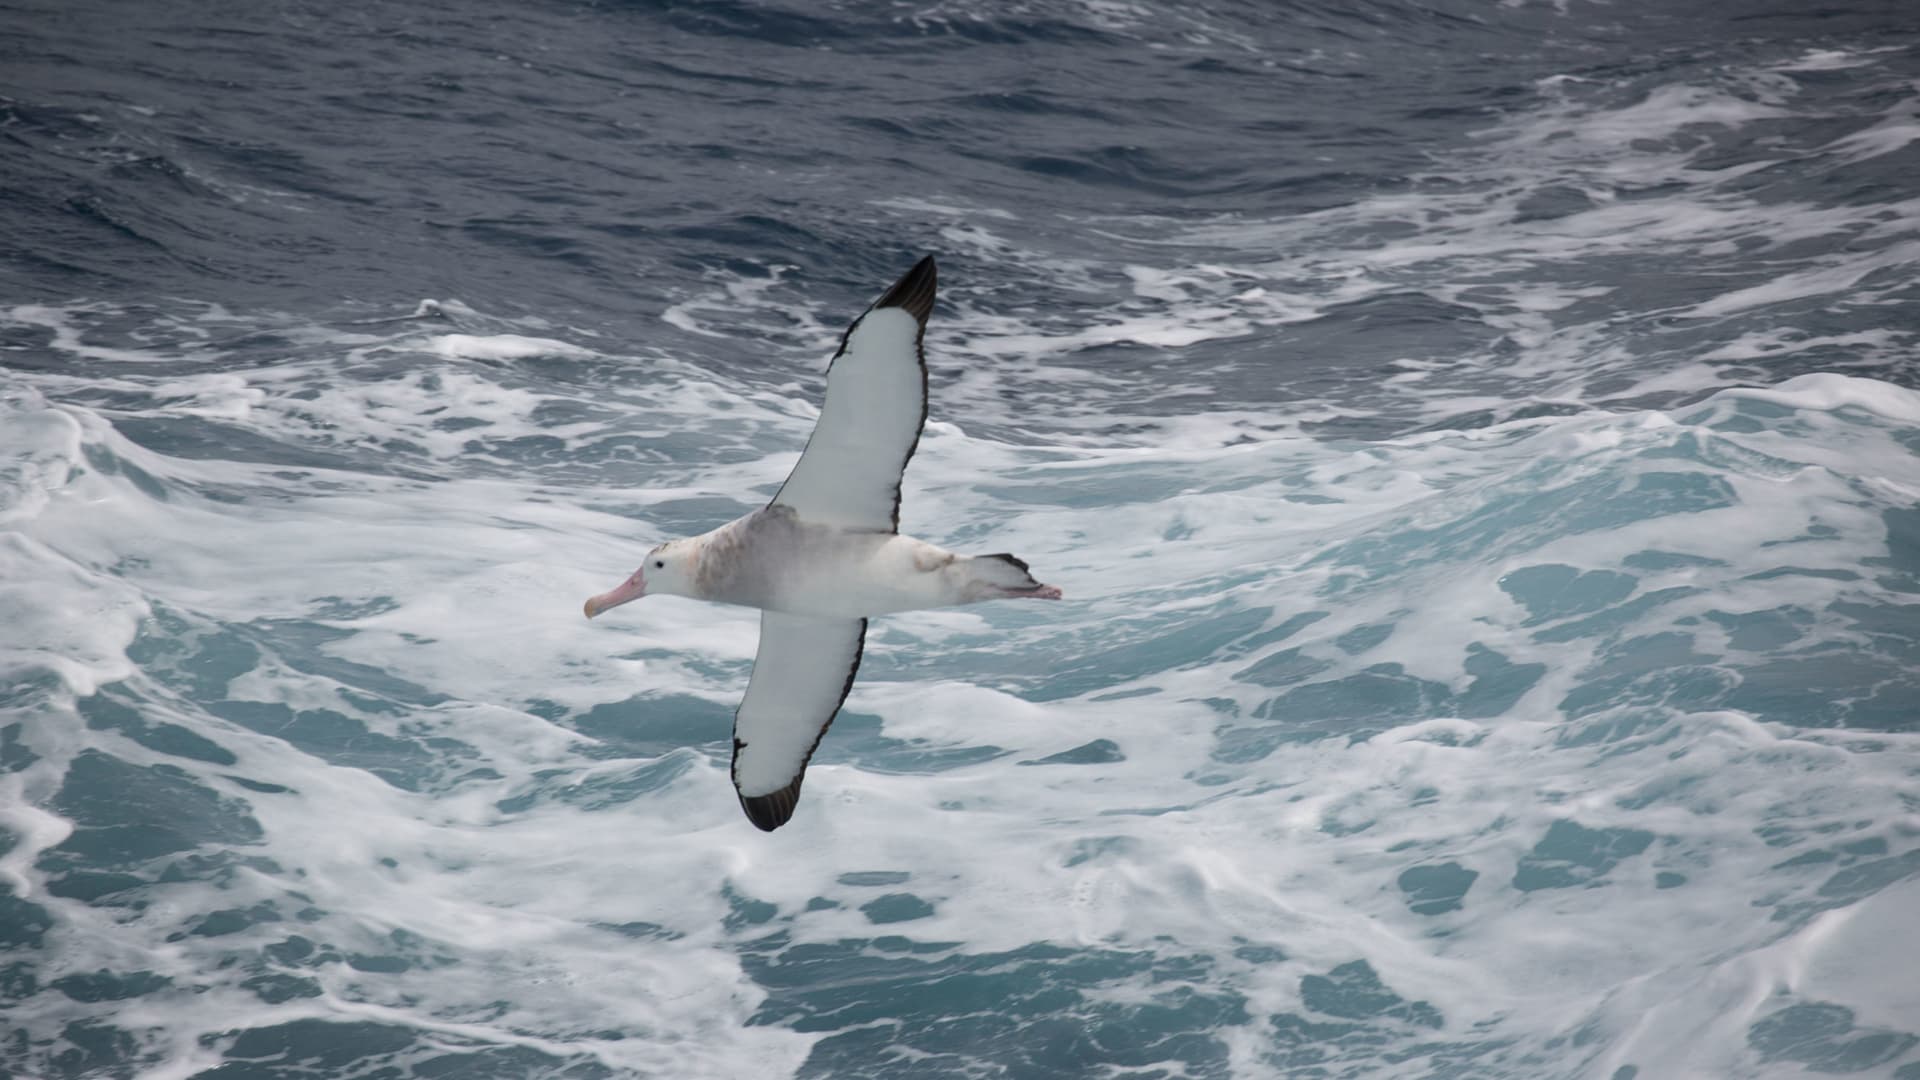 Photographing “The Serengeti of the Southern Ocean”